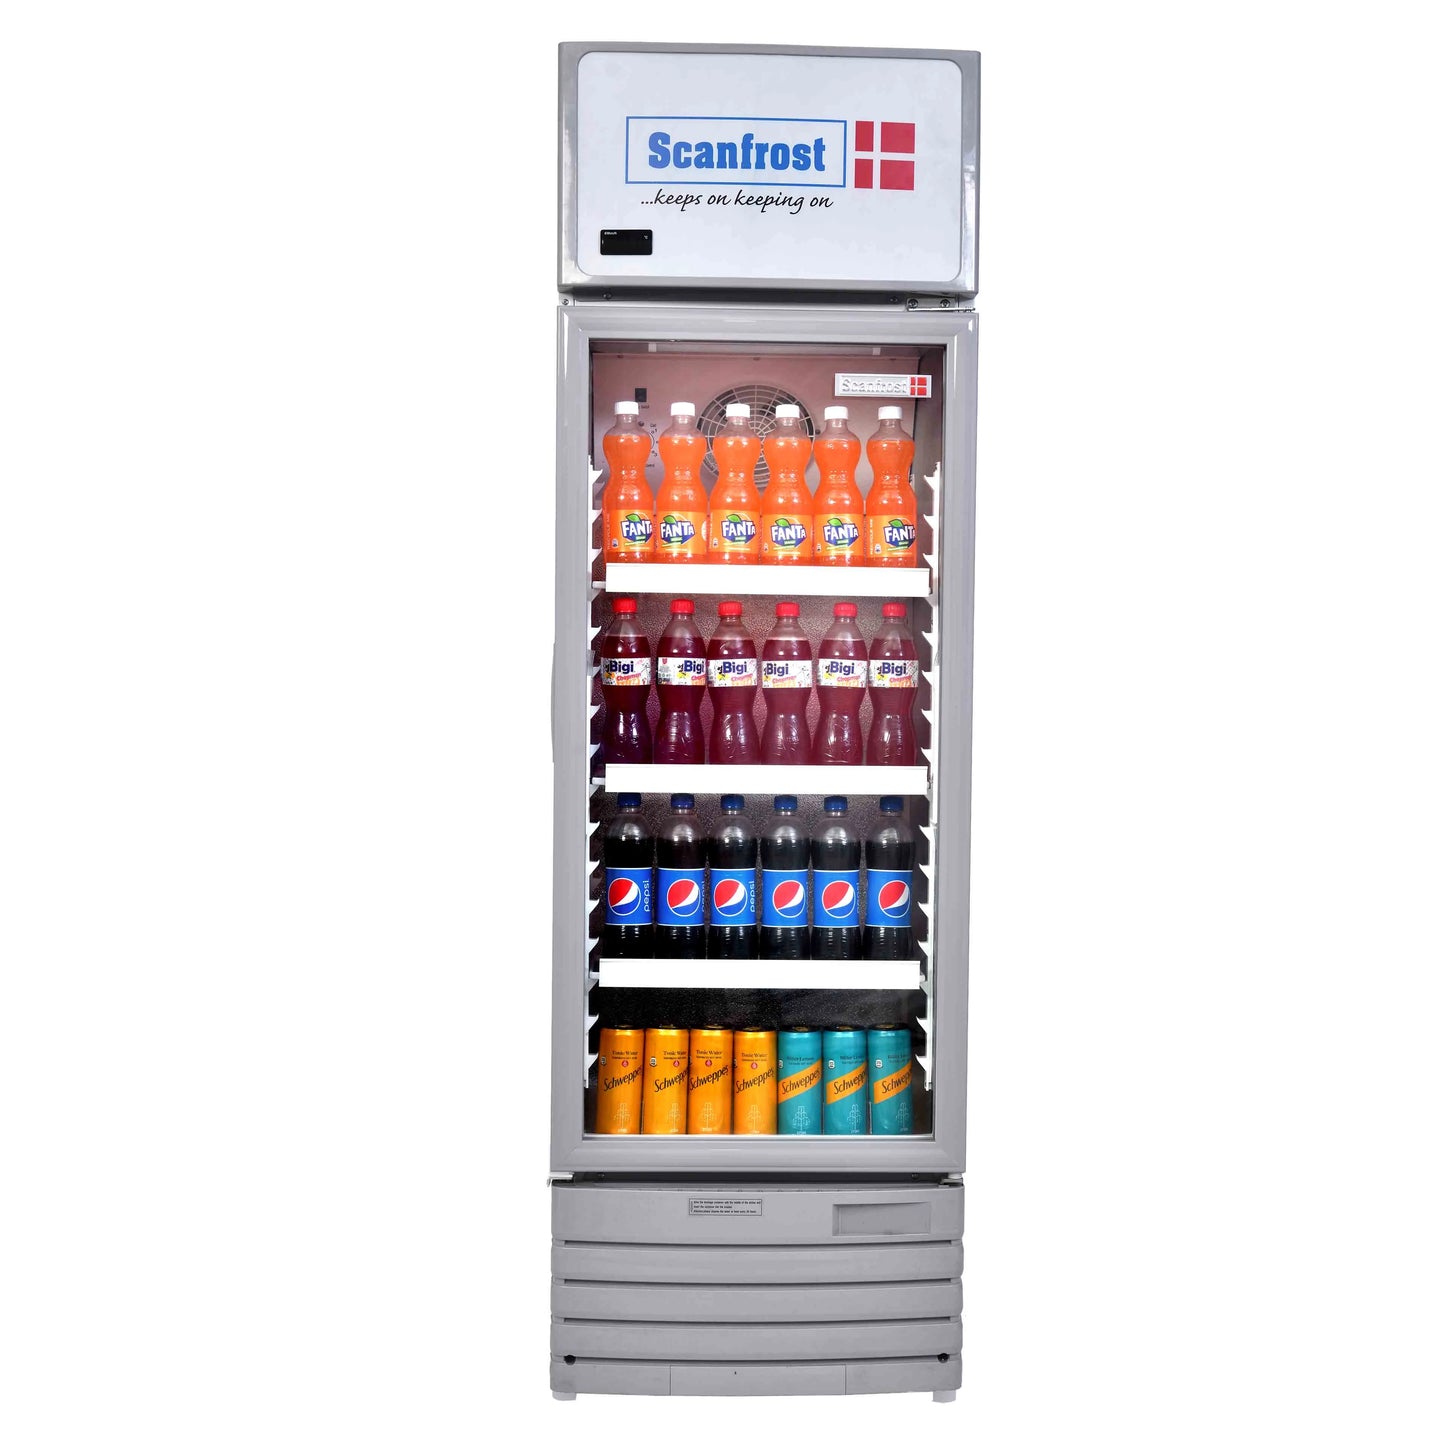 Scanfrost 220Litres Beverage Chiller - SFUC220